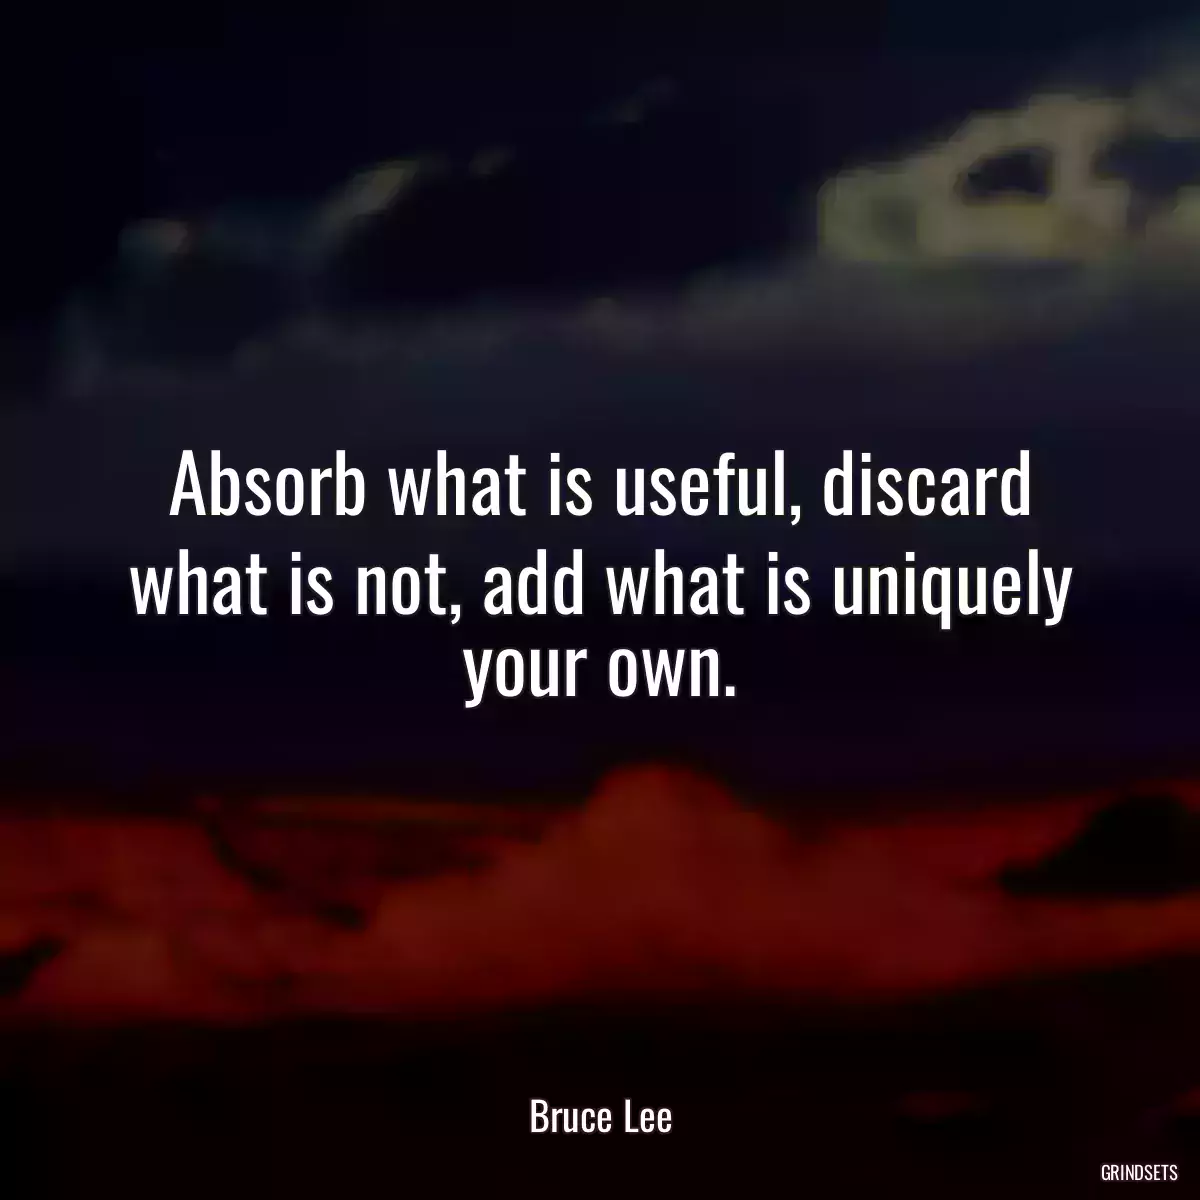 Absorb what is useful, discard what is not, add what is uniquely your own.